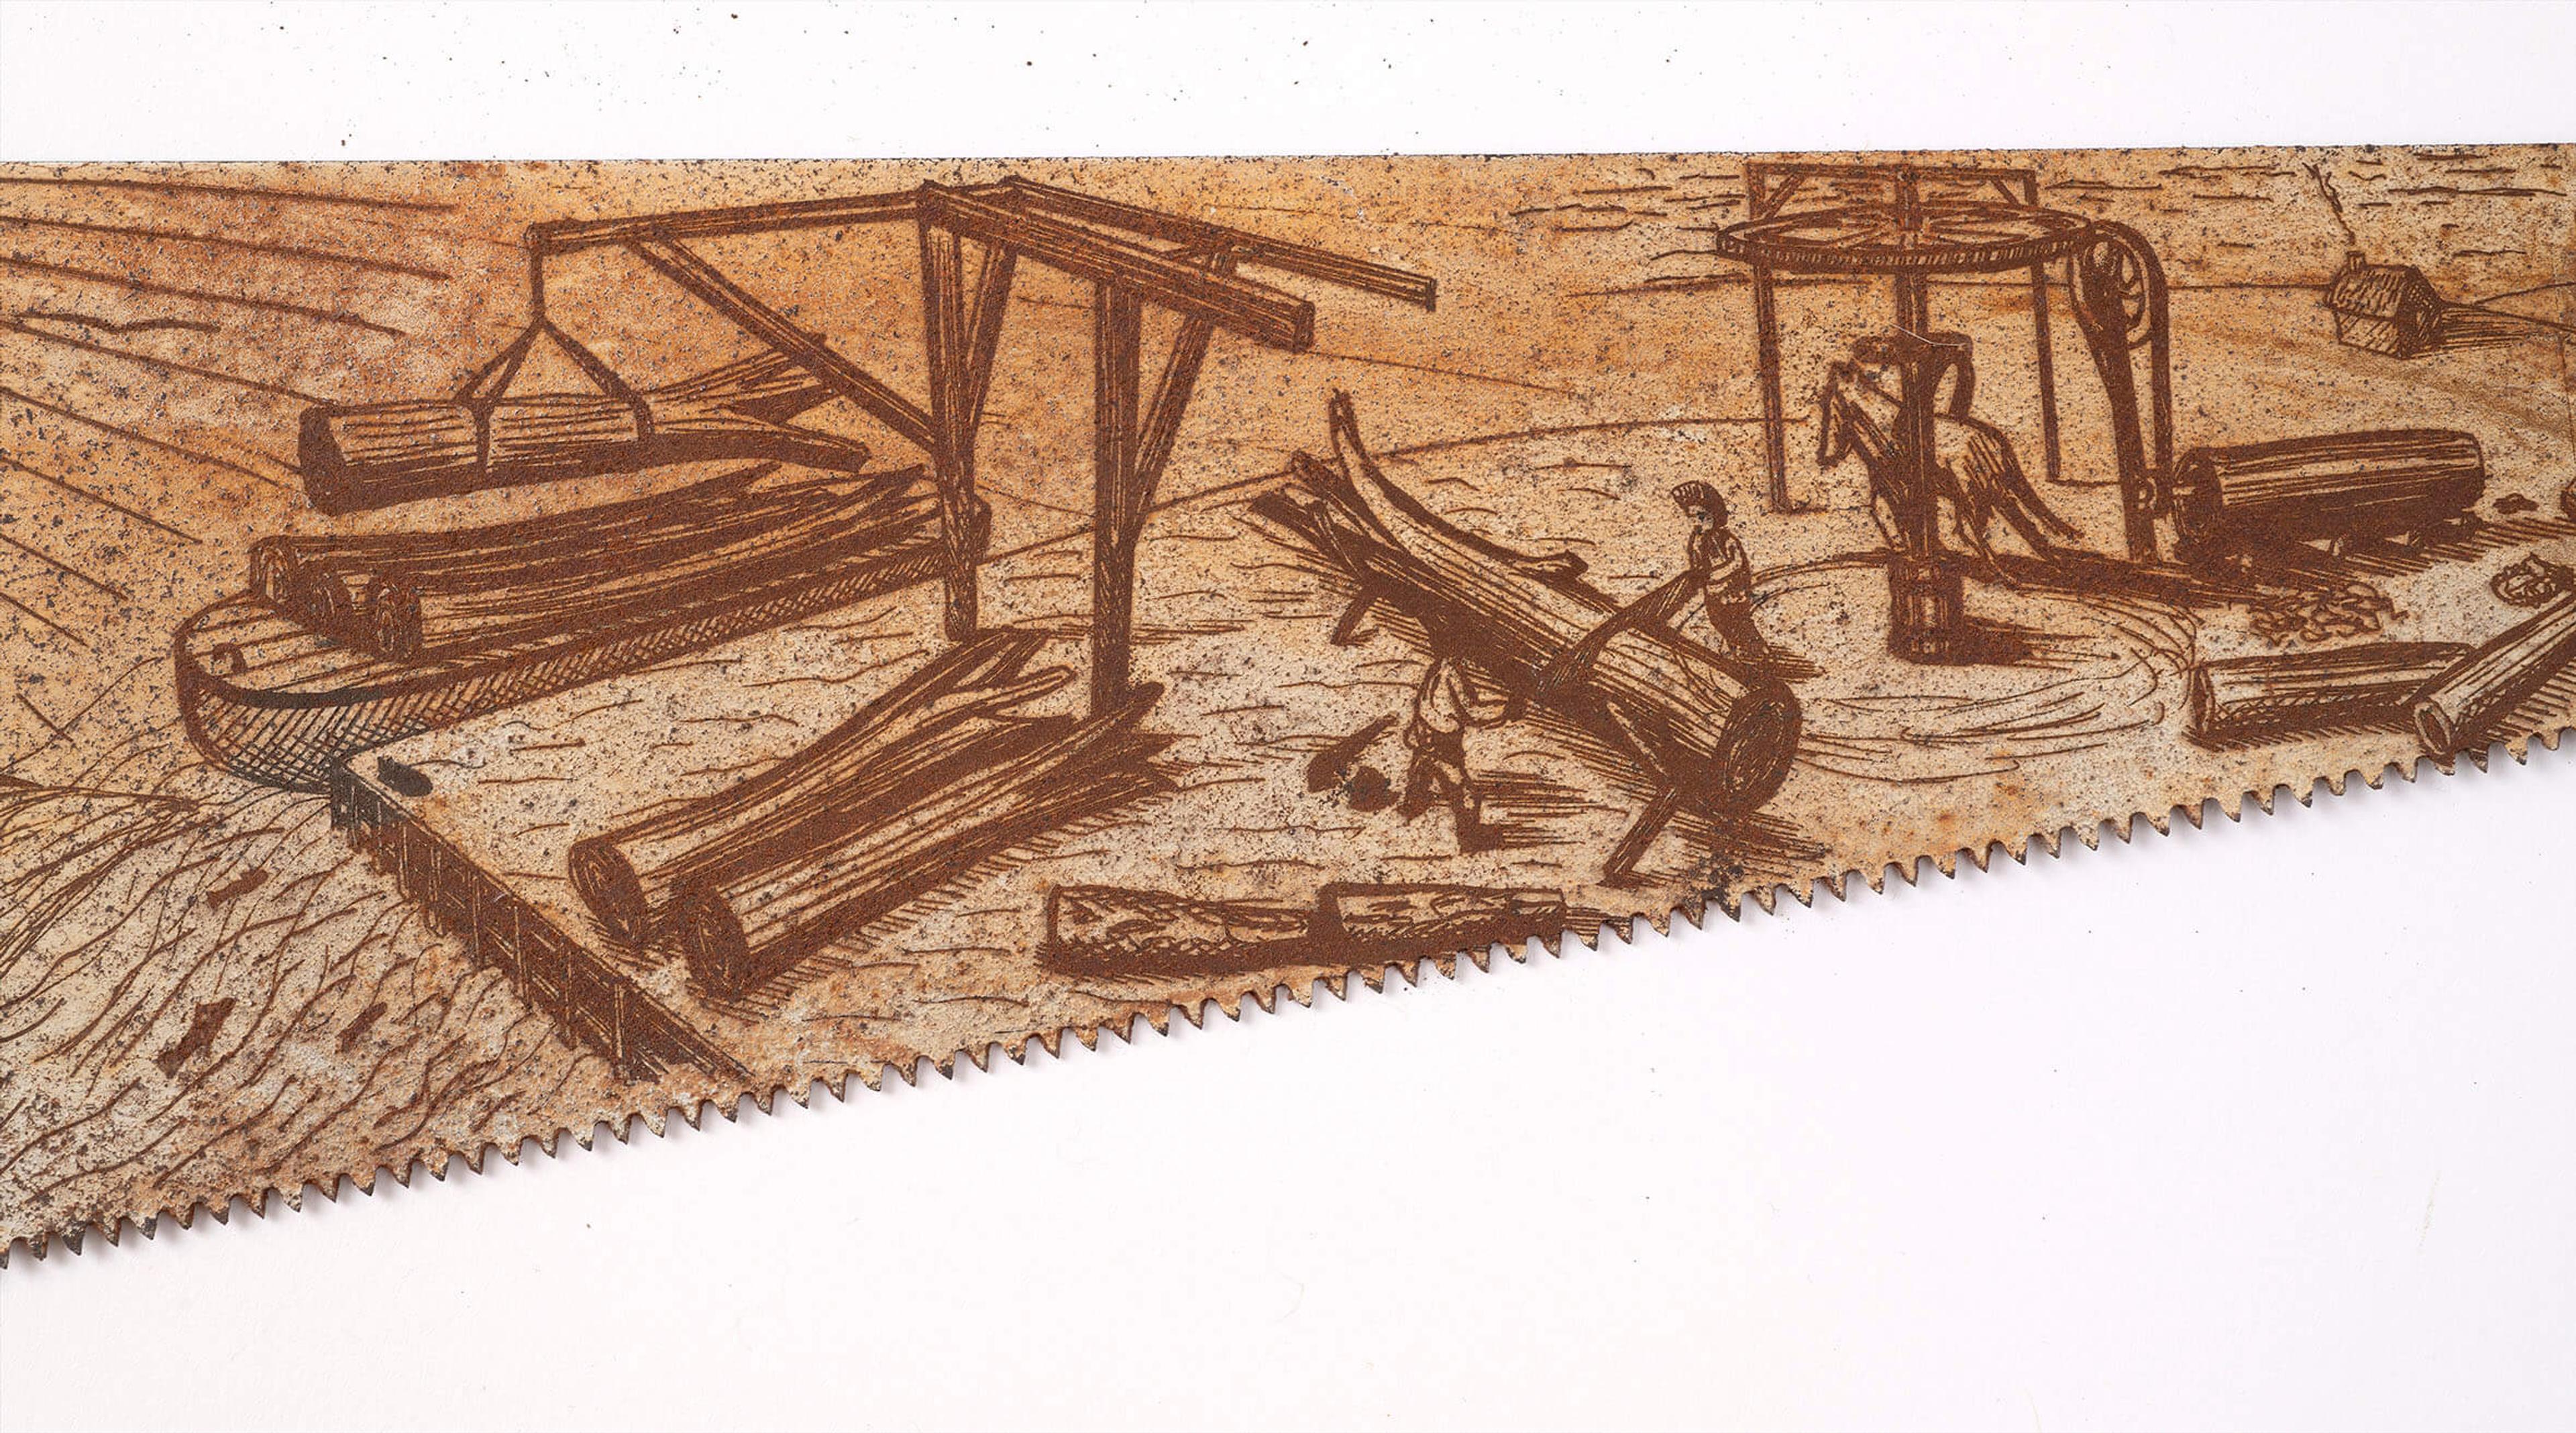 Sheet of rusted steel with illustration of wooden pipe manufacturing etched into the surface